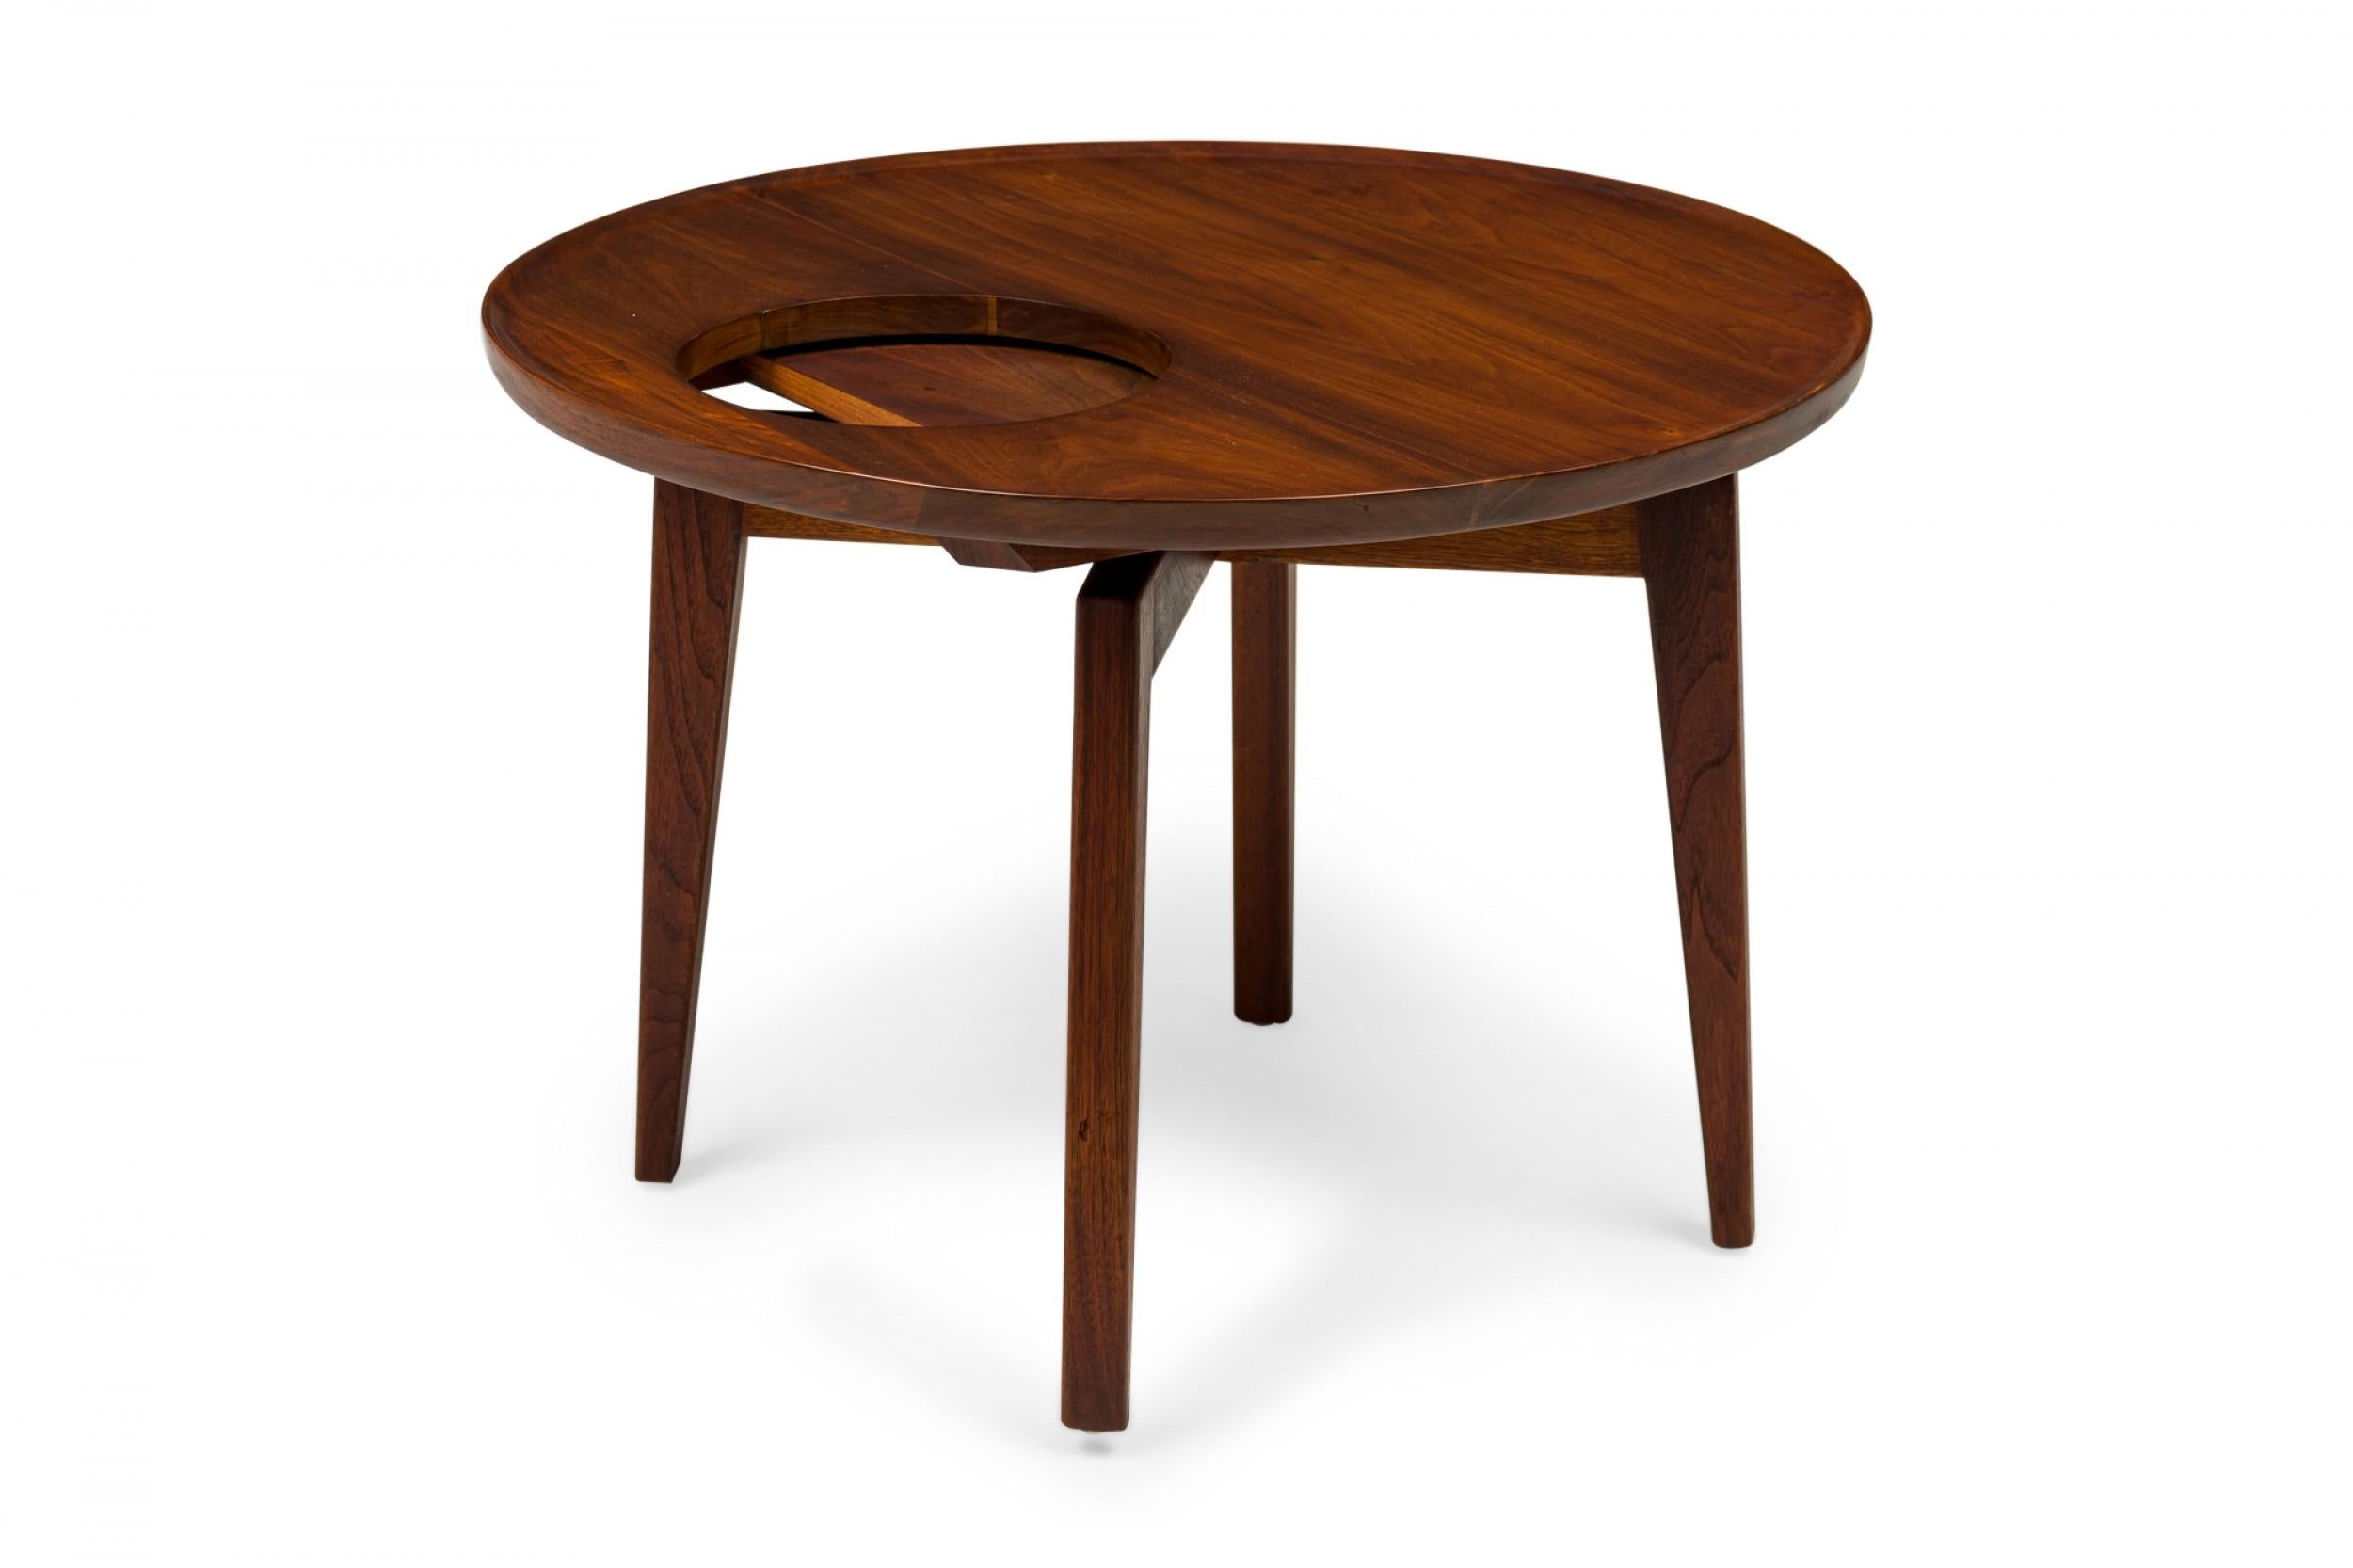 Danish Mid-Century lazy susan end / side table with a rotating circular top with an off-center circular cutout supported by four tapered square wooden legs. (JENS RISOM)
